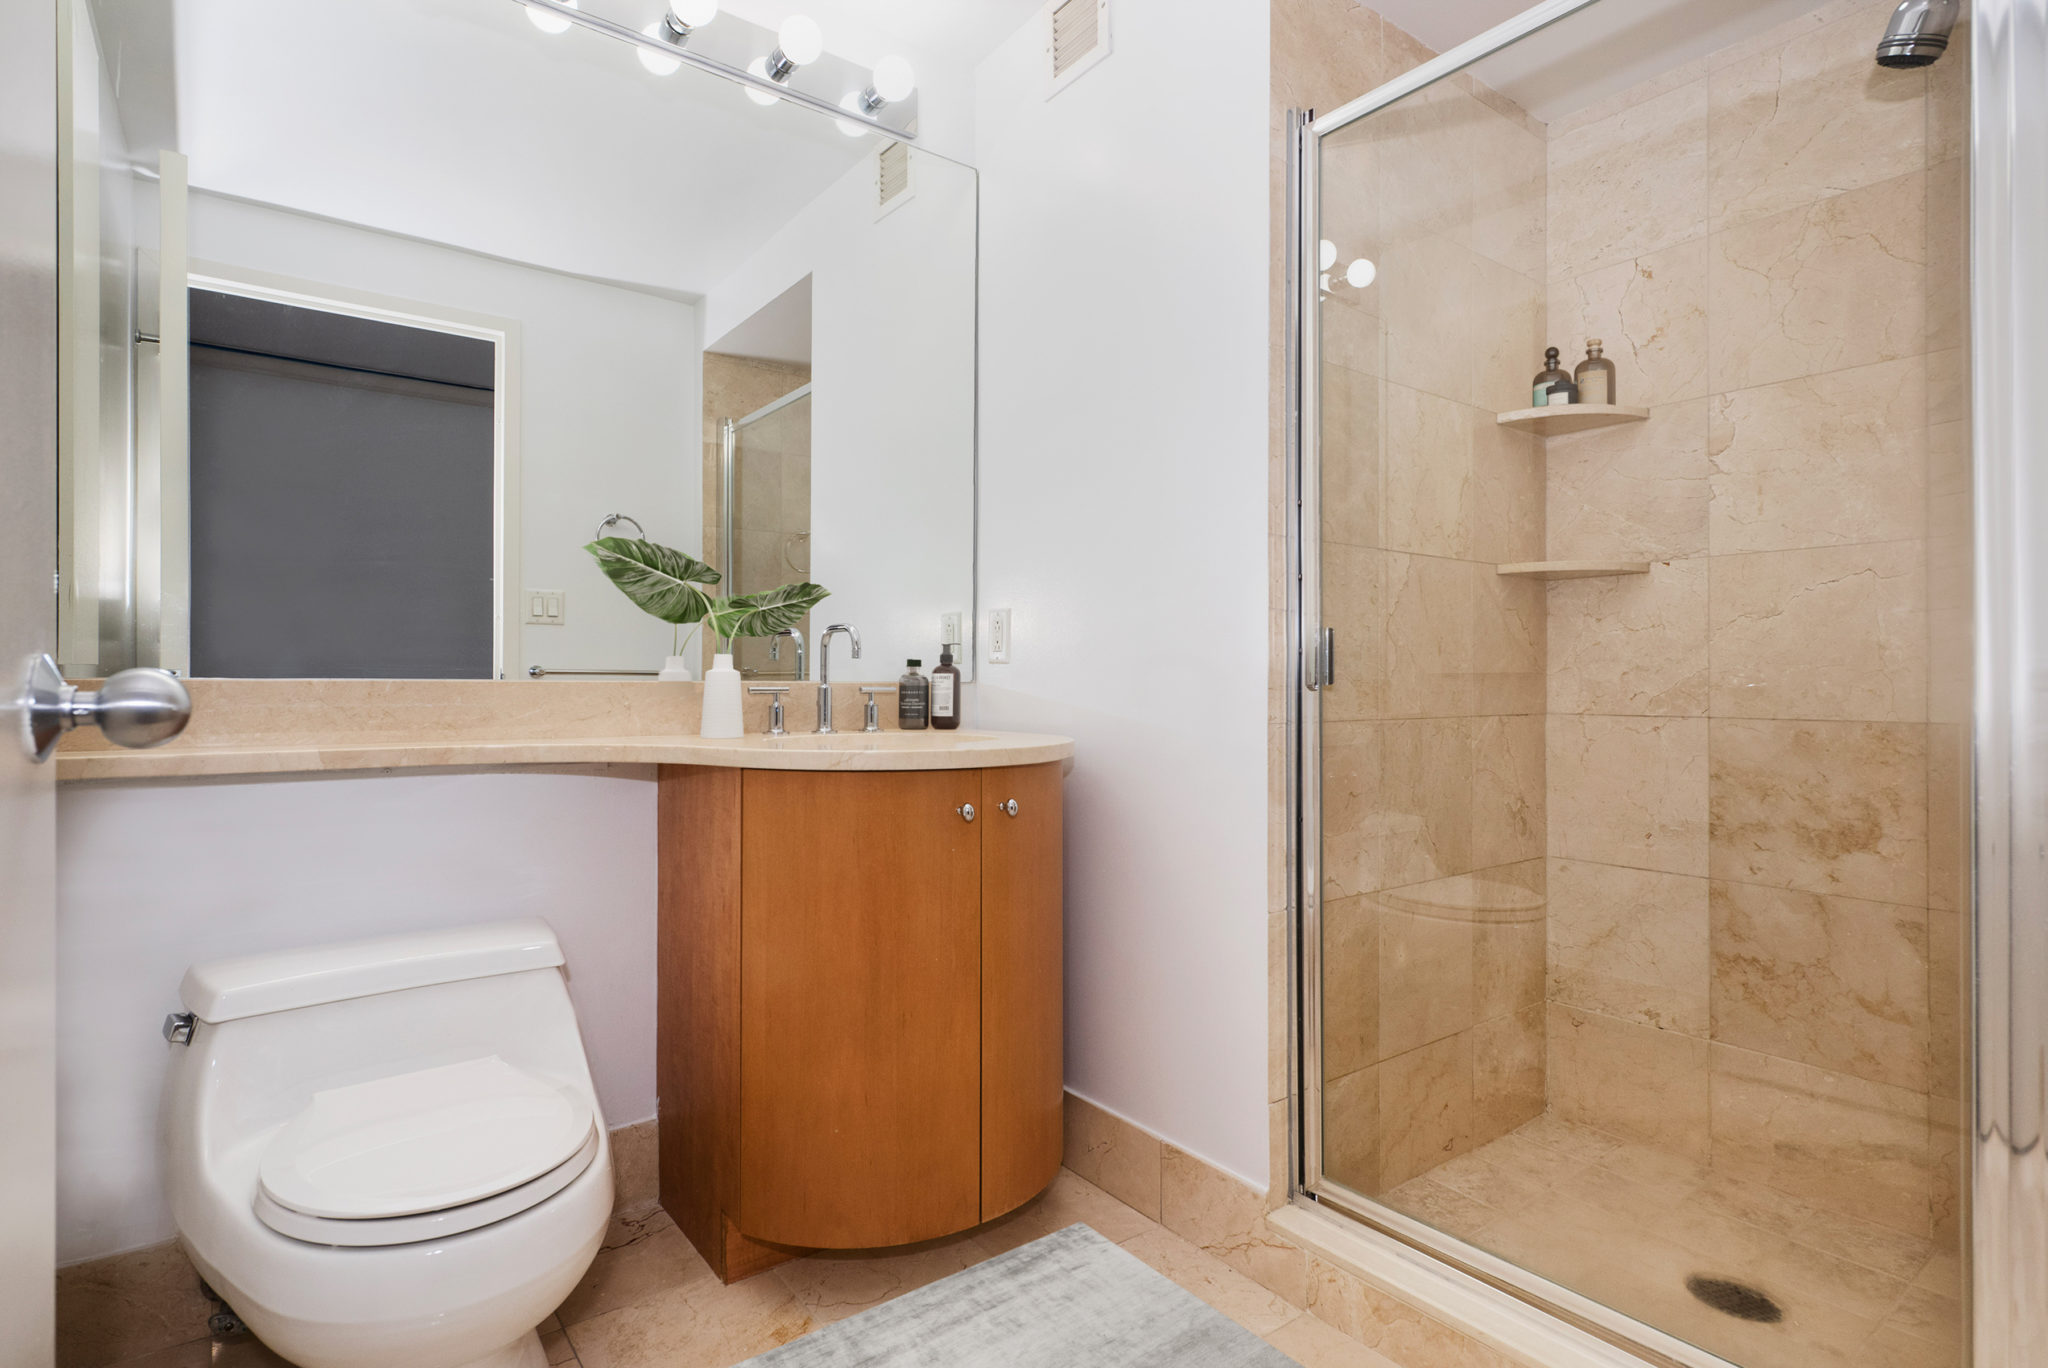 a bathroom with a granite countertop sink toilet and shower